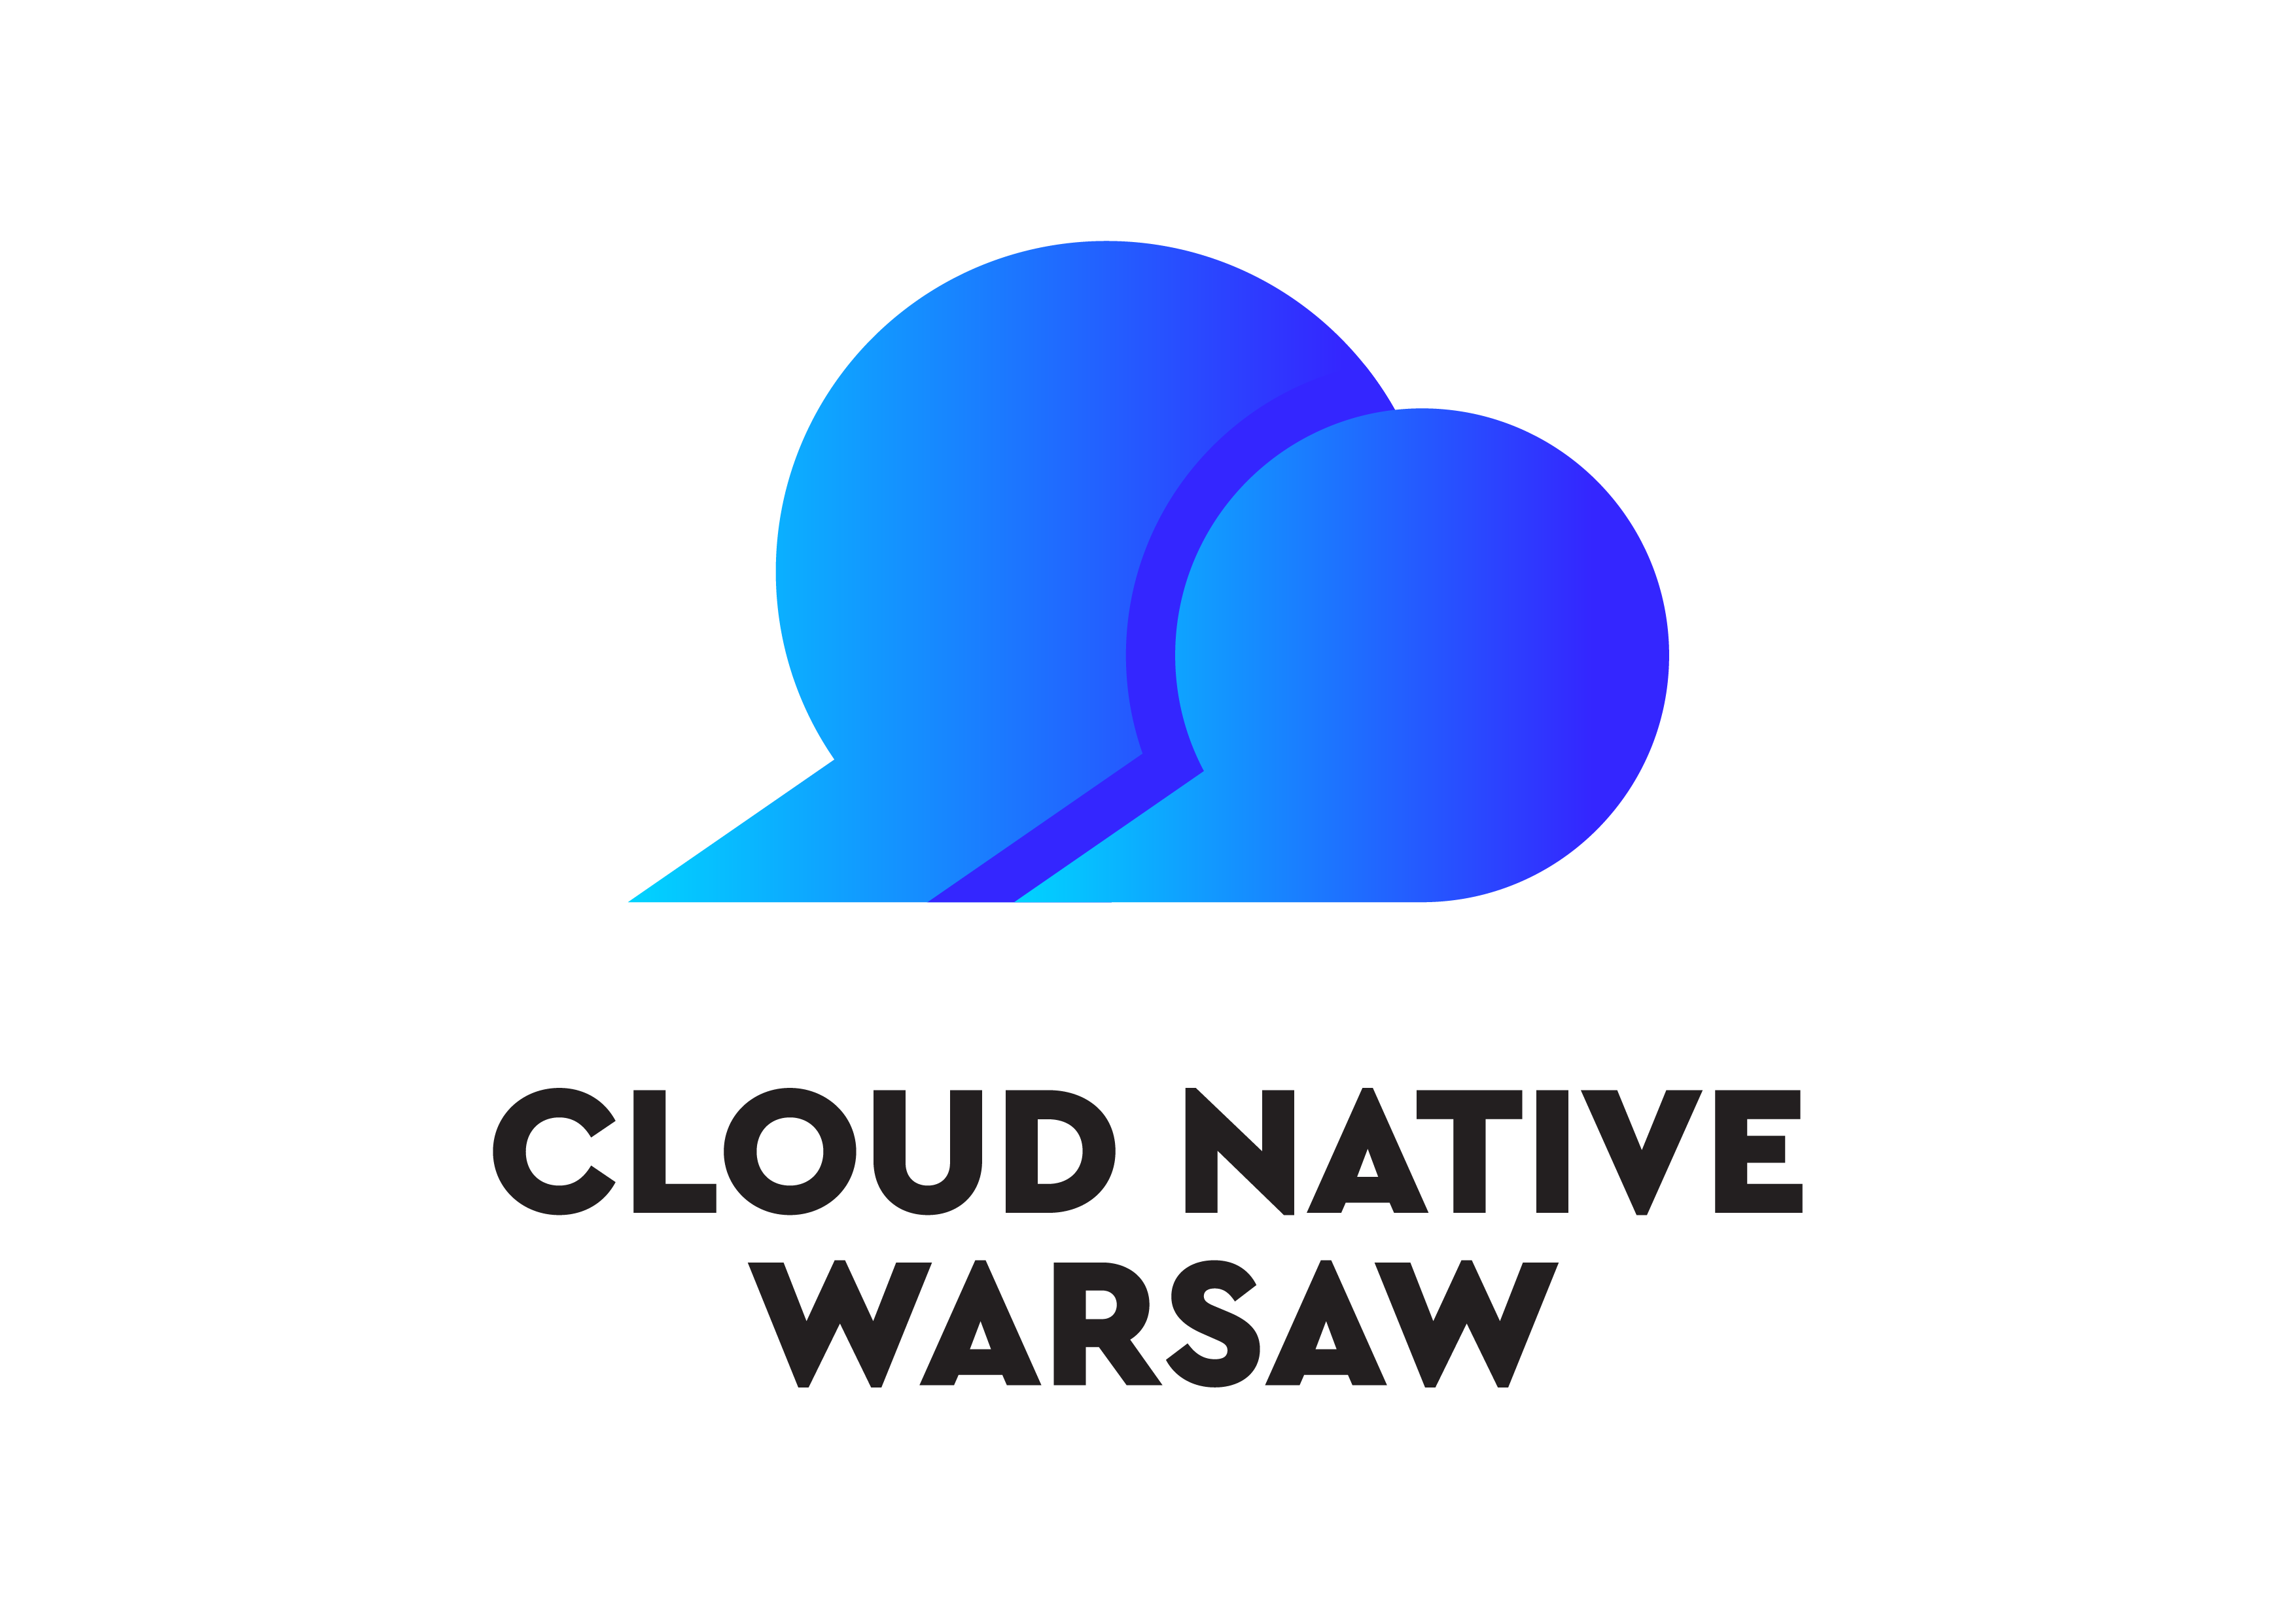 Cloud Native Warsaw Conference